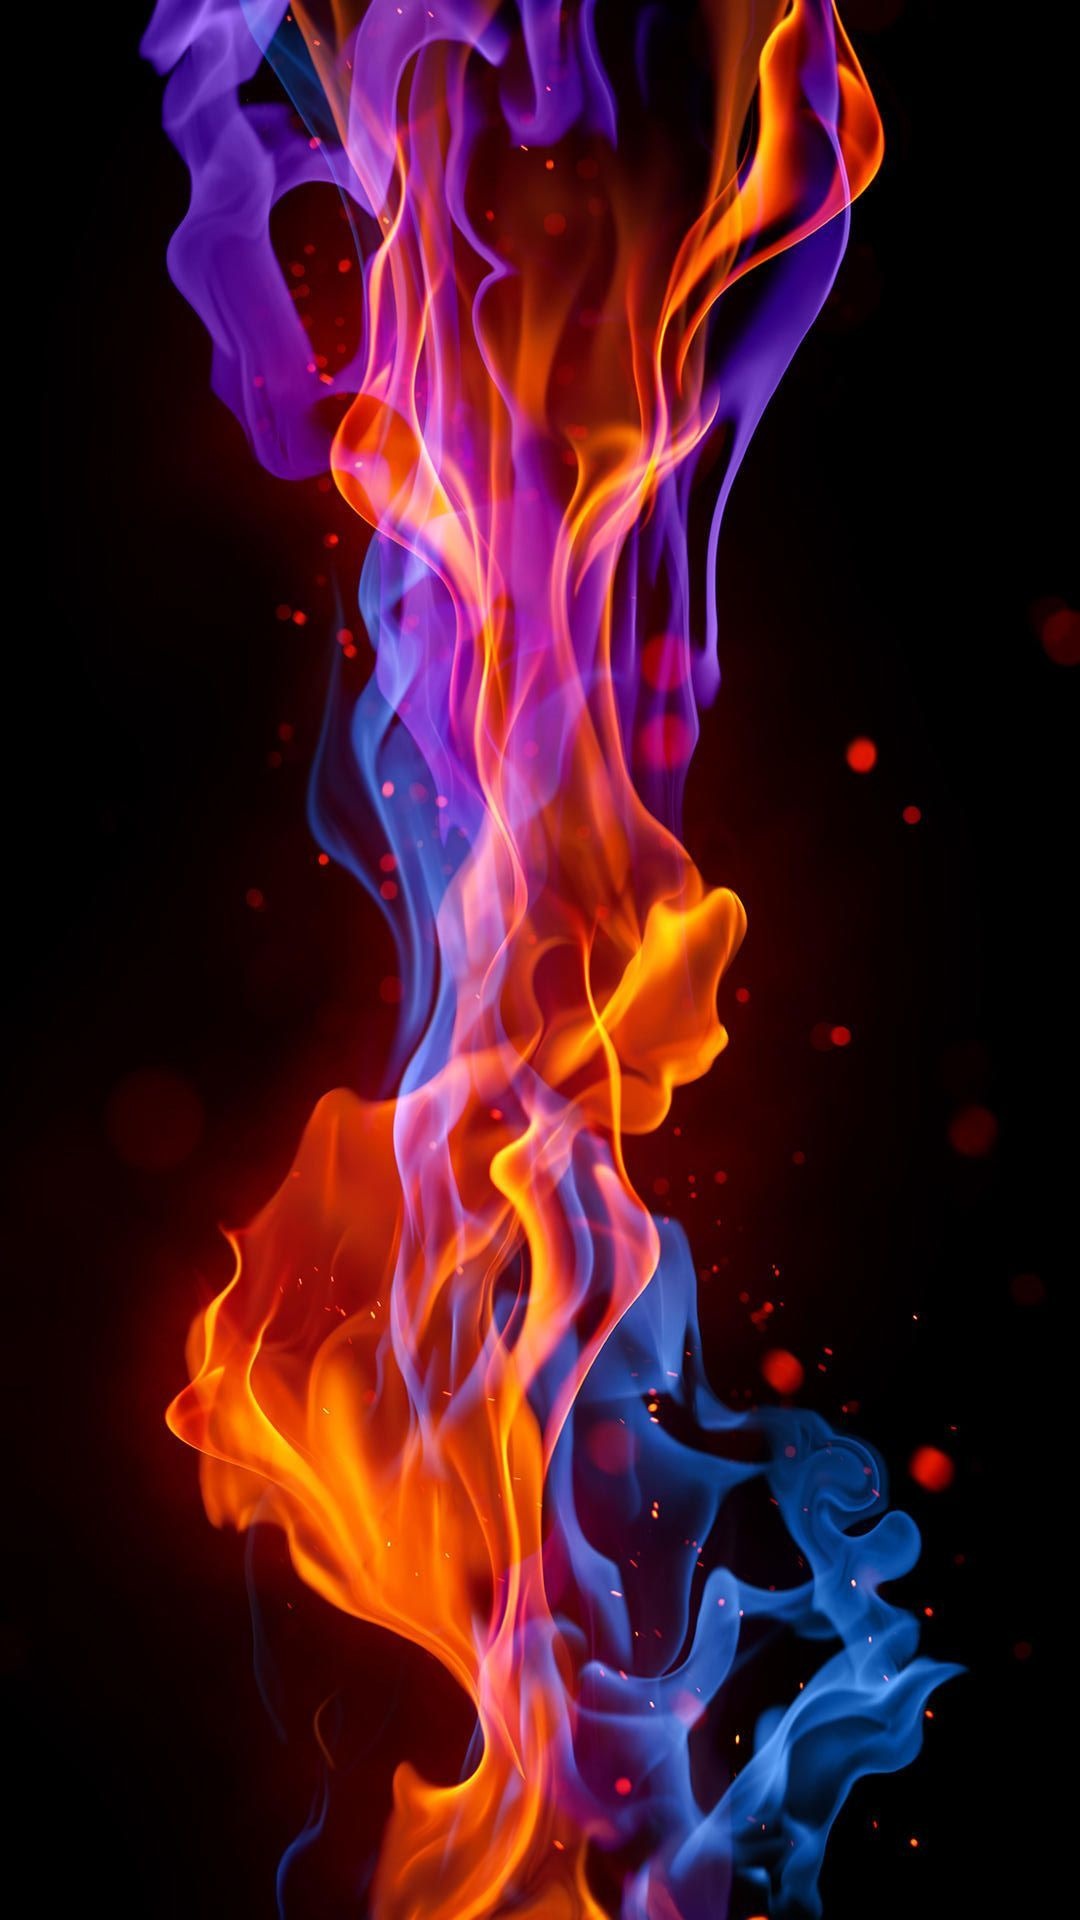 Flaming iPhone wallpapers, Dynamic heat waves, Fiery glow, Vivid color palette, Captivating flames, 1080x1920 Full HD Phone